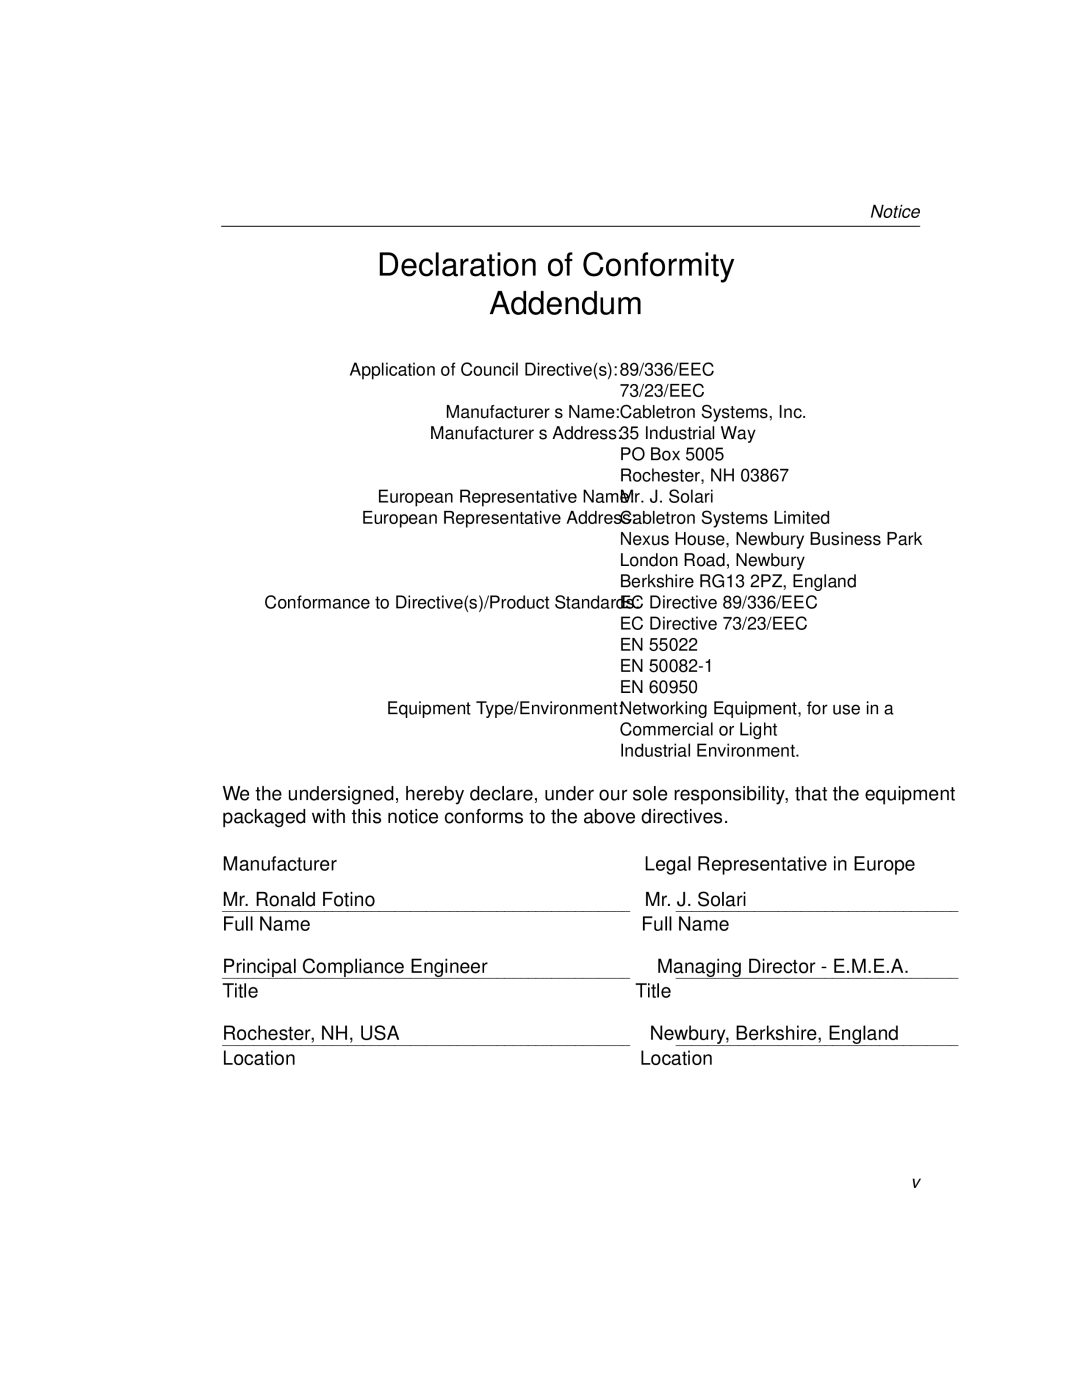 Cabletron Systems 520, 510 manual Declaration of Conformity Addendum 